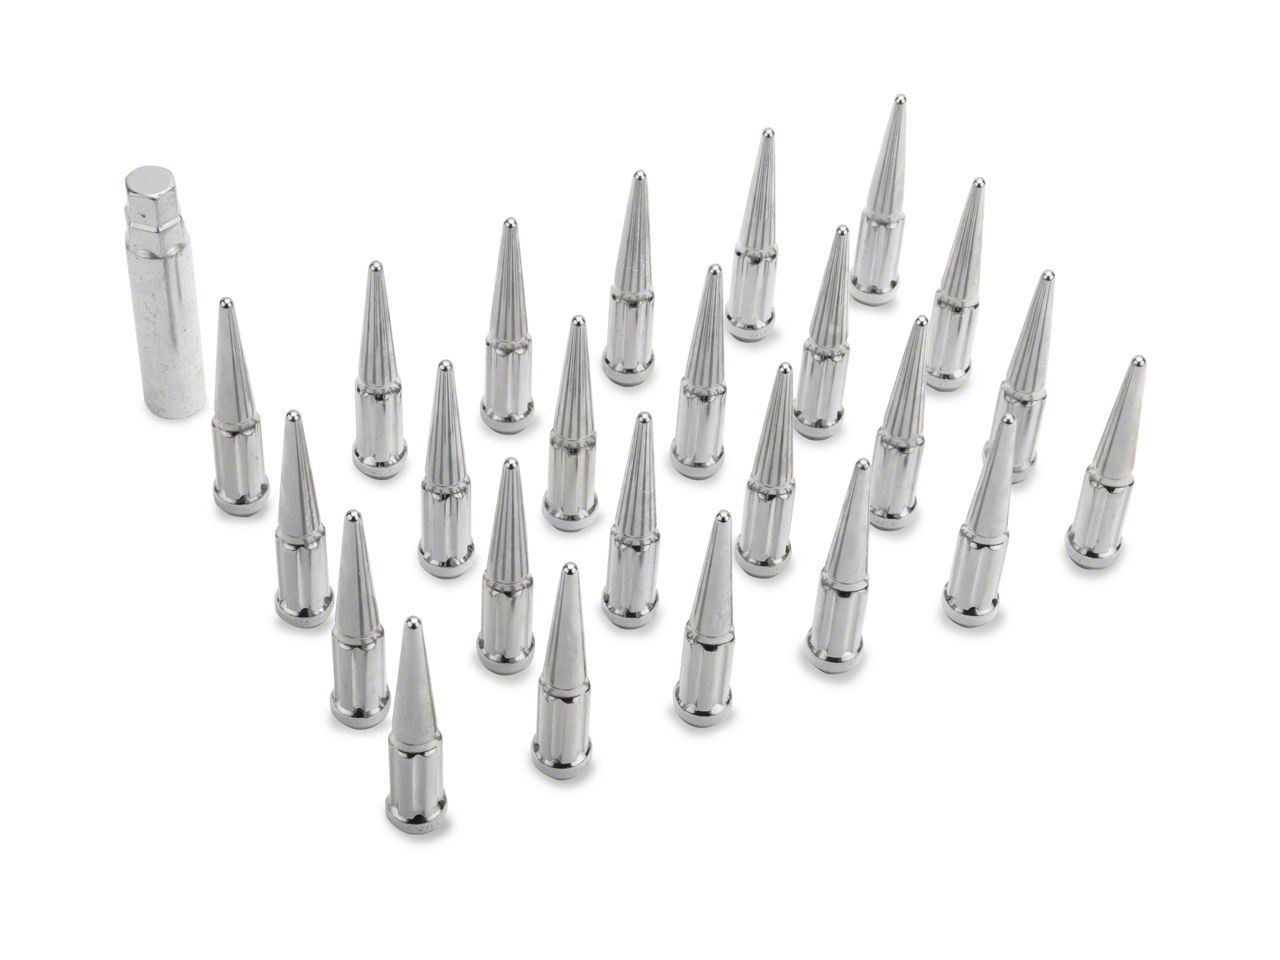 Chevy Spiked Lug Nuts Discount 1692122105